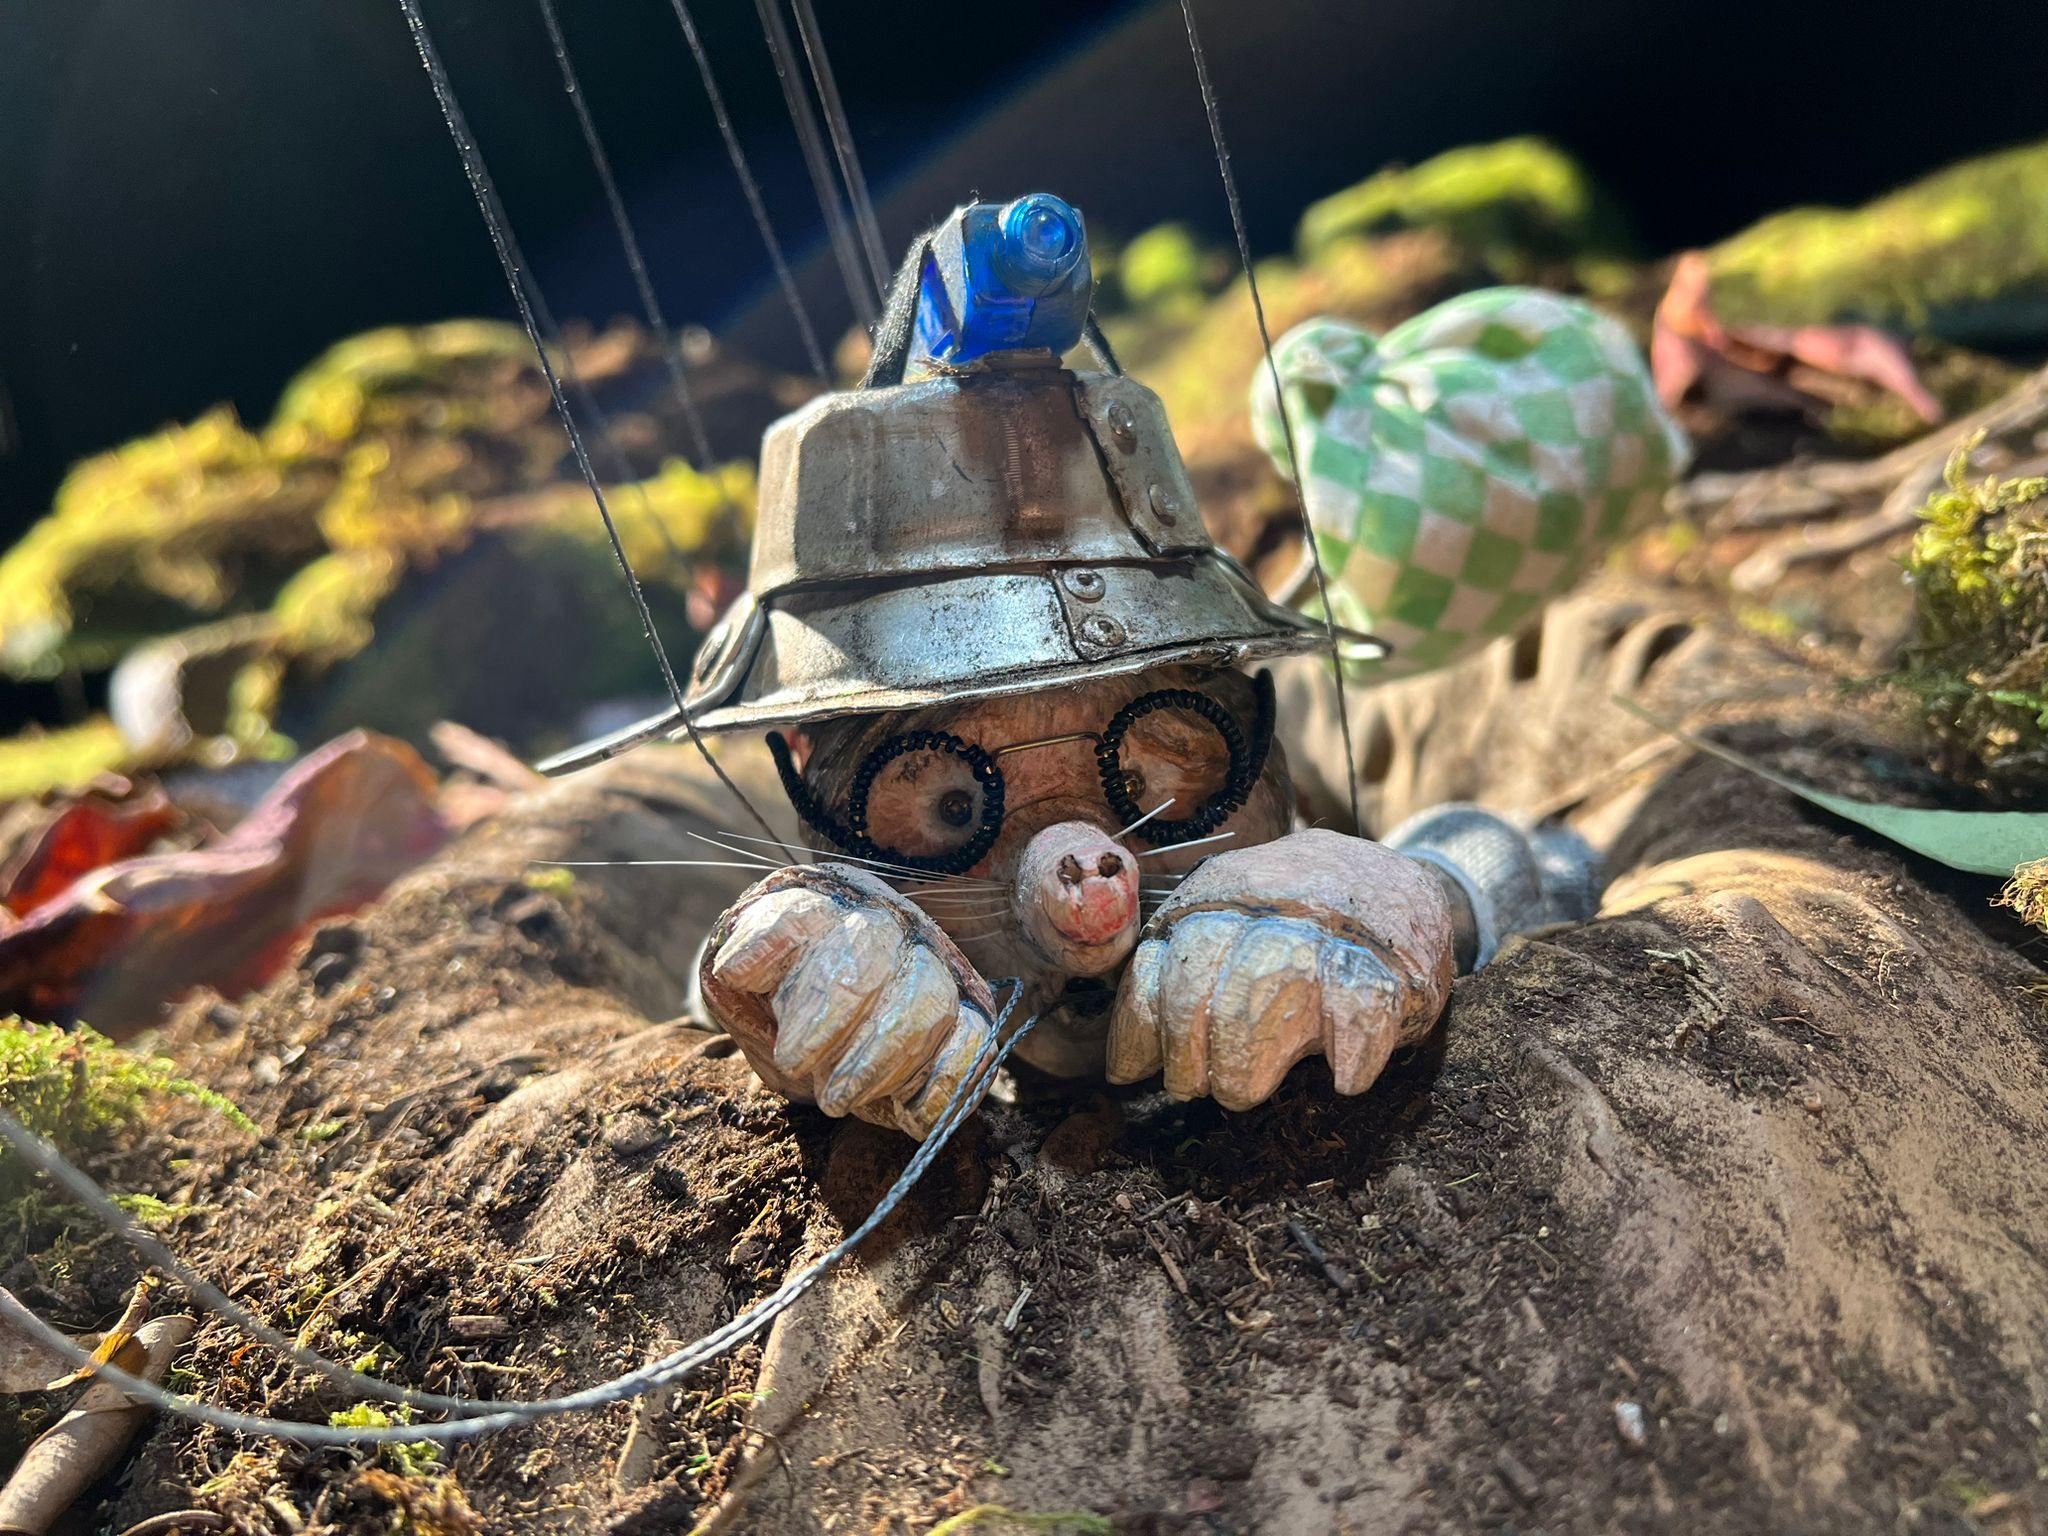 The Leisure and Cultural Services Department launched a free online puppet programme, "Blue Fruit Tree in the Fog" by Fantasy Puppet Theatre, in its "Cheers!" Series. Photo shows a film still from "Blue Fruit Tree in the Fog".